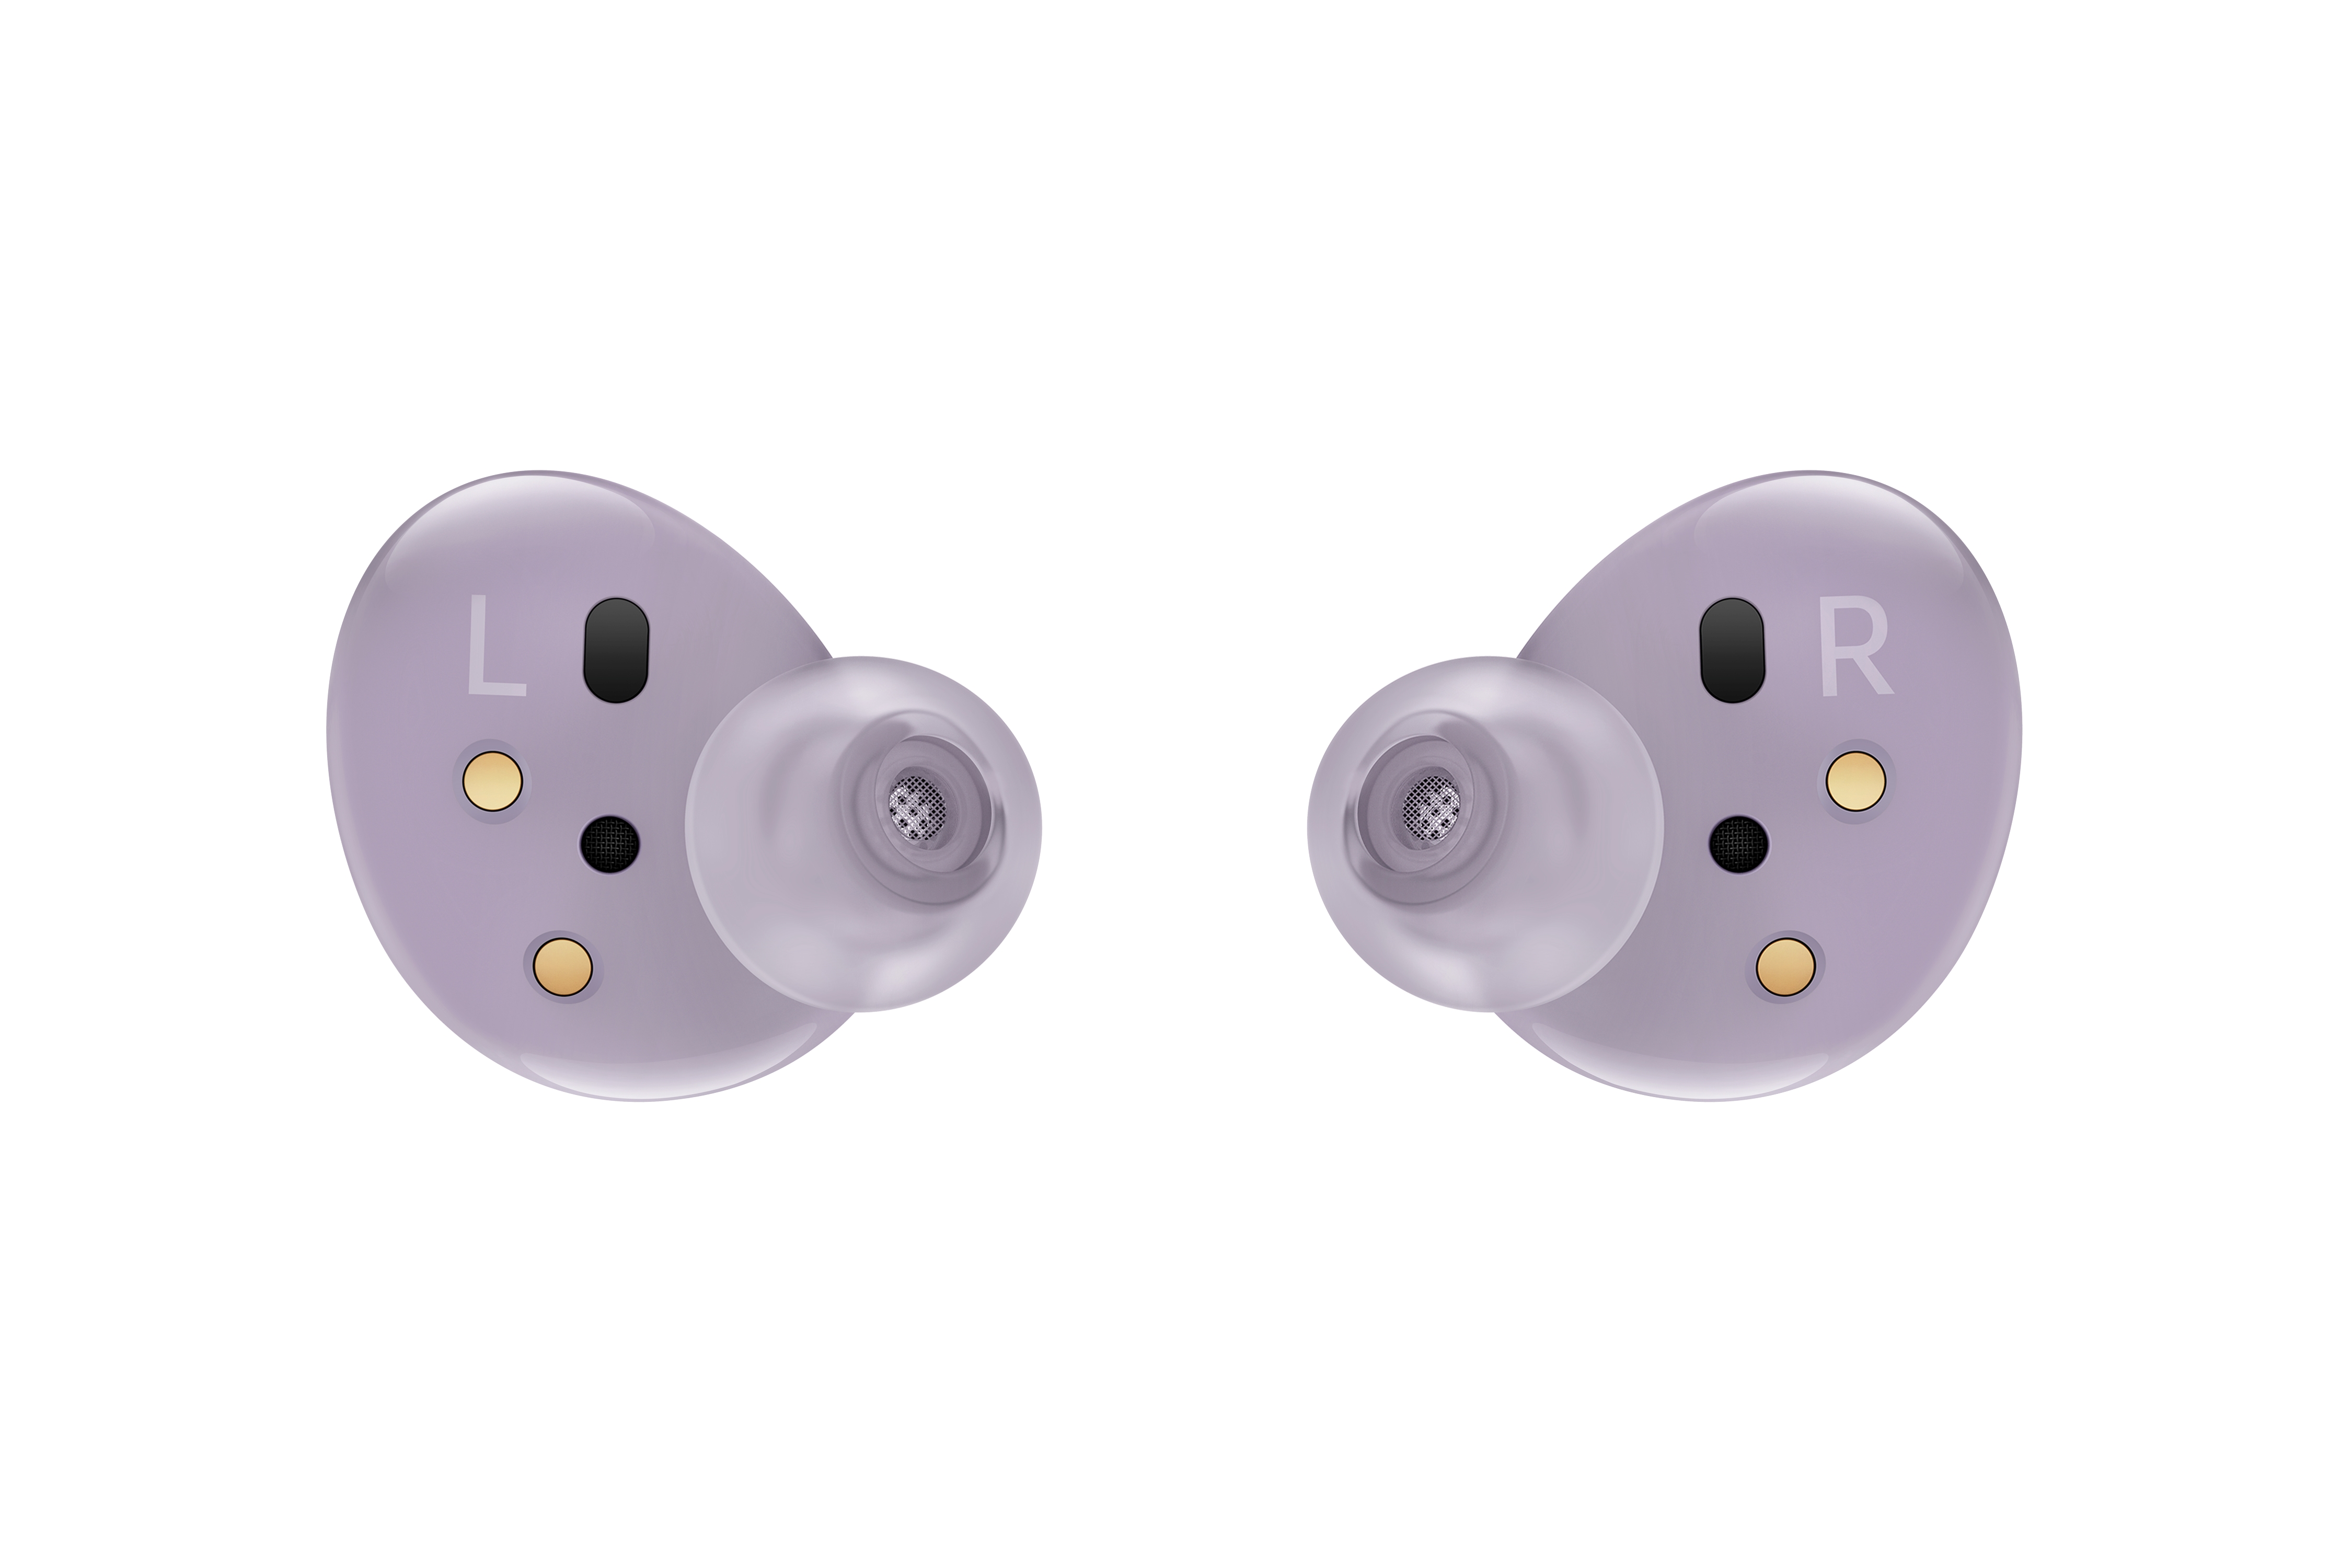 Samsung Galaxy Buds2 Bluetooth Earbuds, True Wireless with Charging Case, Lavender - image 2 of 11